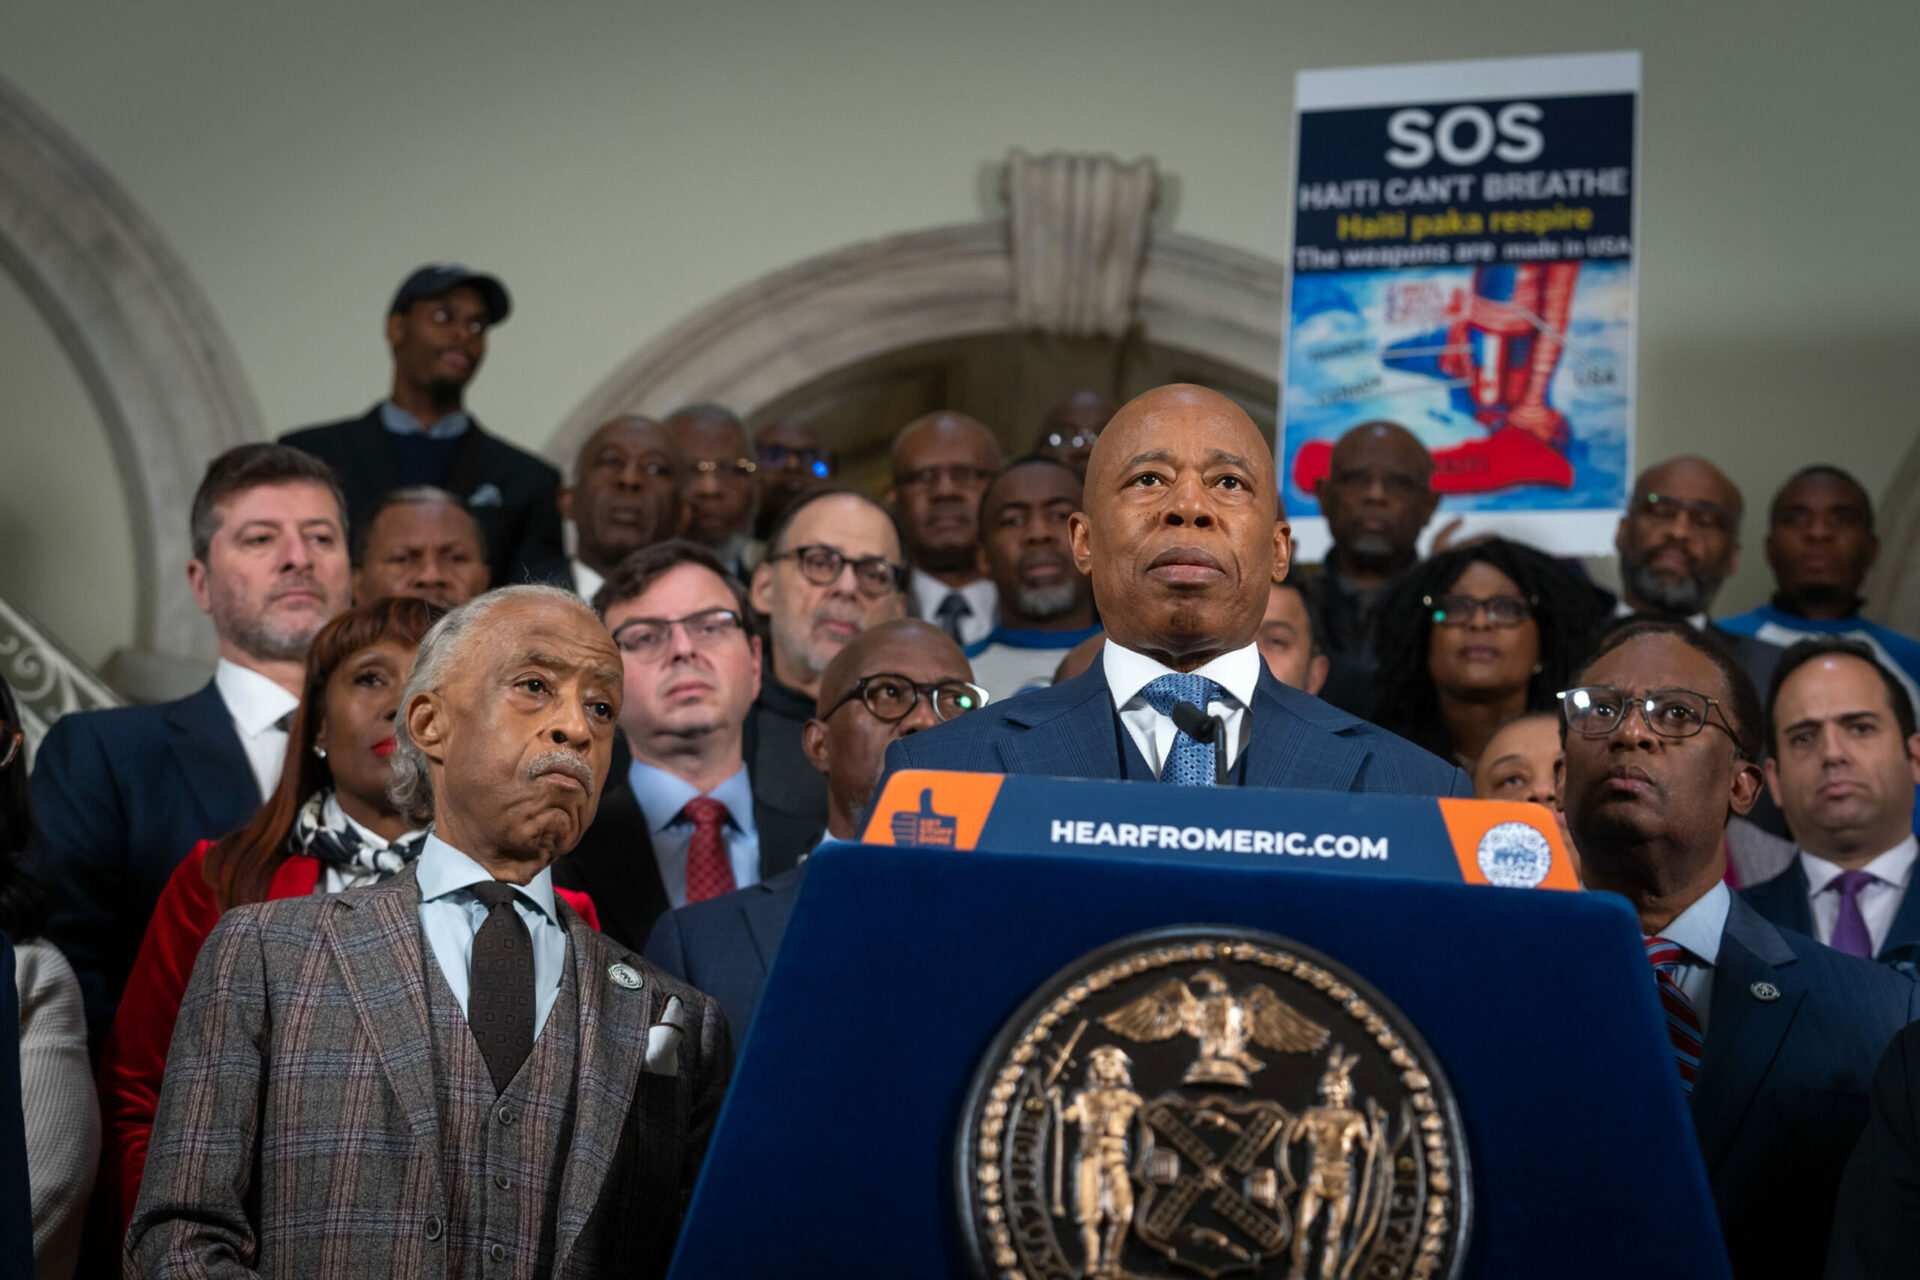 NYC Mayor Adams, Sharpton call for US action on Haiti unrest, stop short of demanding military intervention